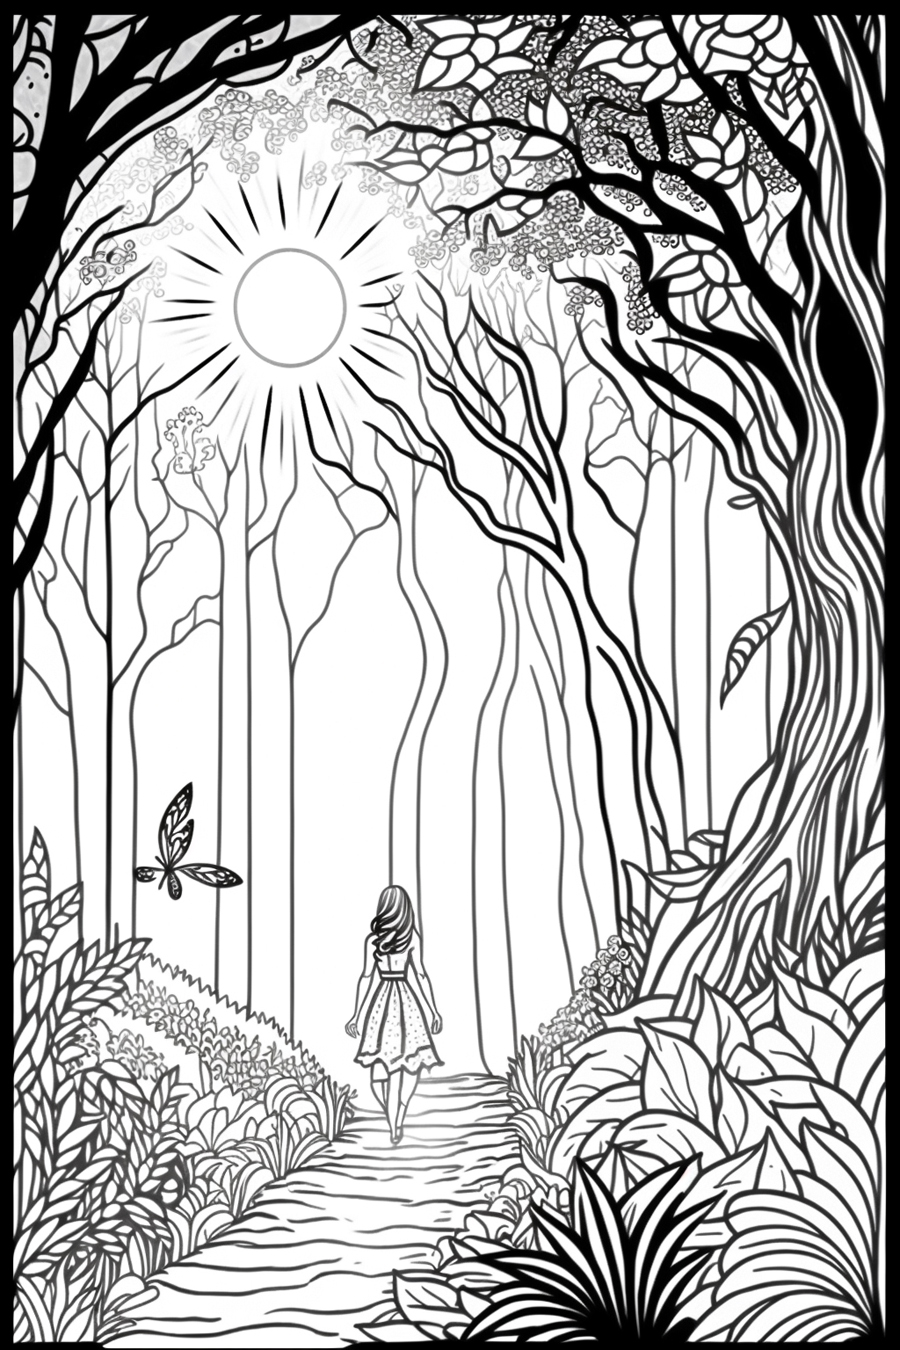 A black and white drawing of a girl walking through the forest.